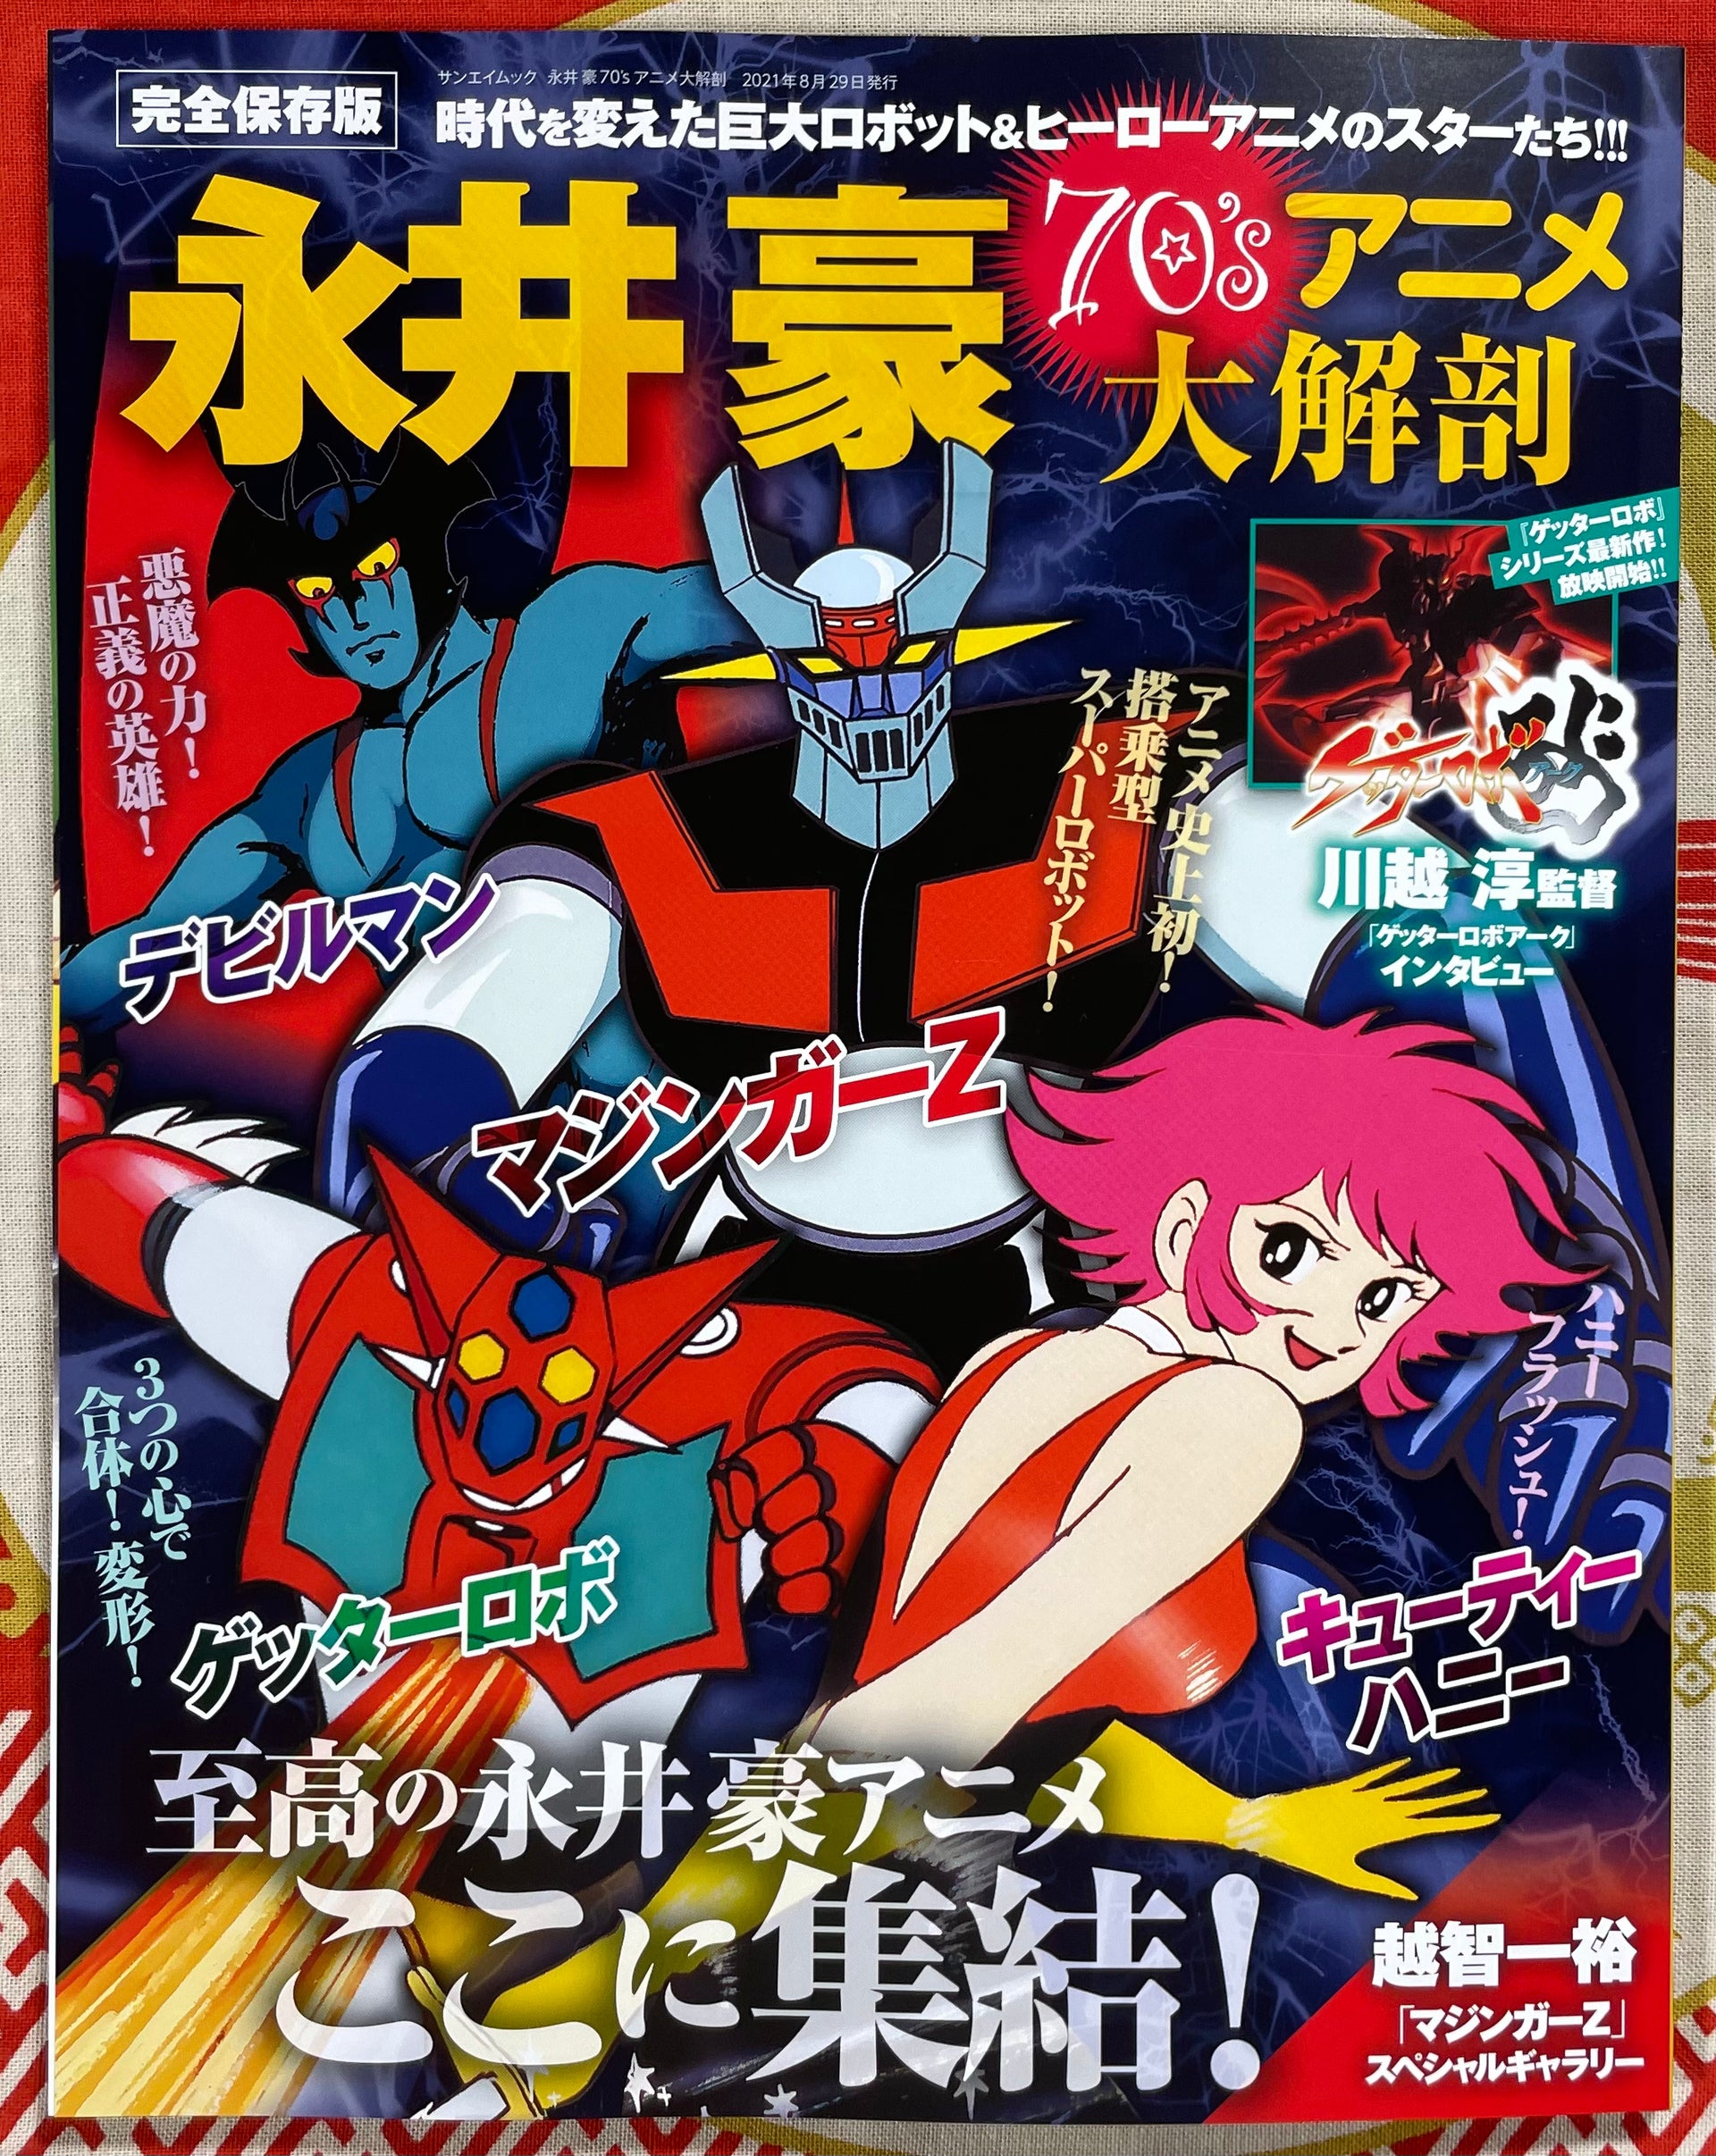 Go Nagai 70s Anime Great Dissection / 永井豪70sアニメ大解剖 With 2